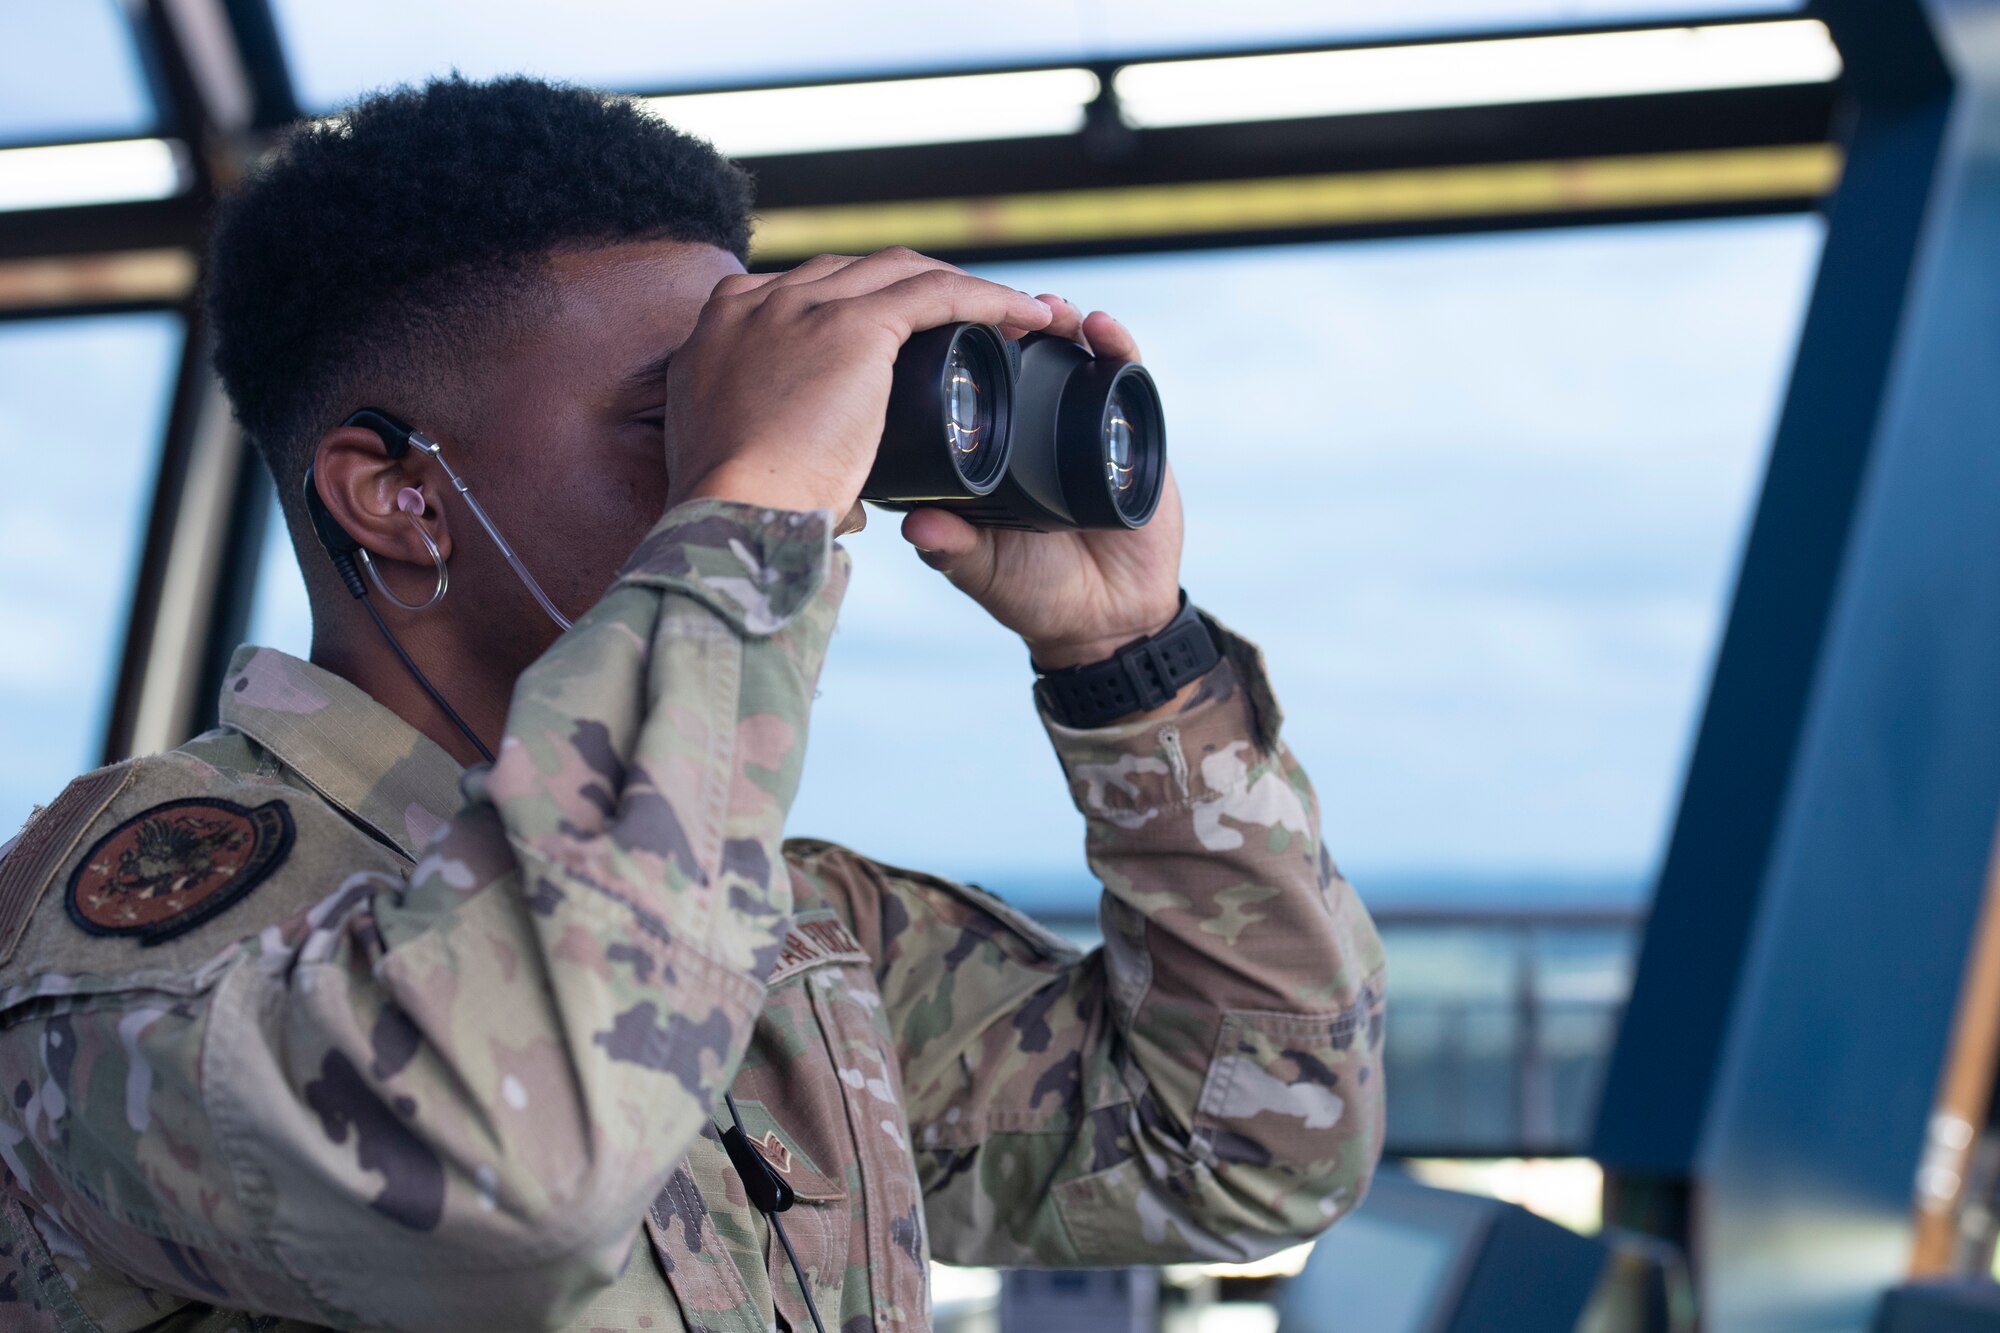 U.S. Air Force Senior Airman Raymond Fields, 52nd Operations Support Squadron air traffic control specialist, peers through his binoculars as a commercial airliner taxis onto the Spangdahlem Air Base runway at Spangdahlem Air Base, Germany, Aug. 23, 2021.